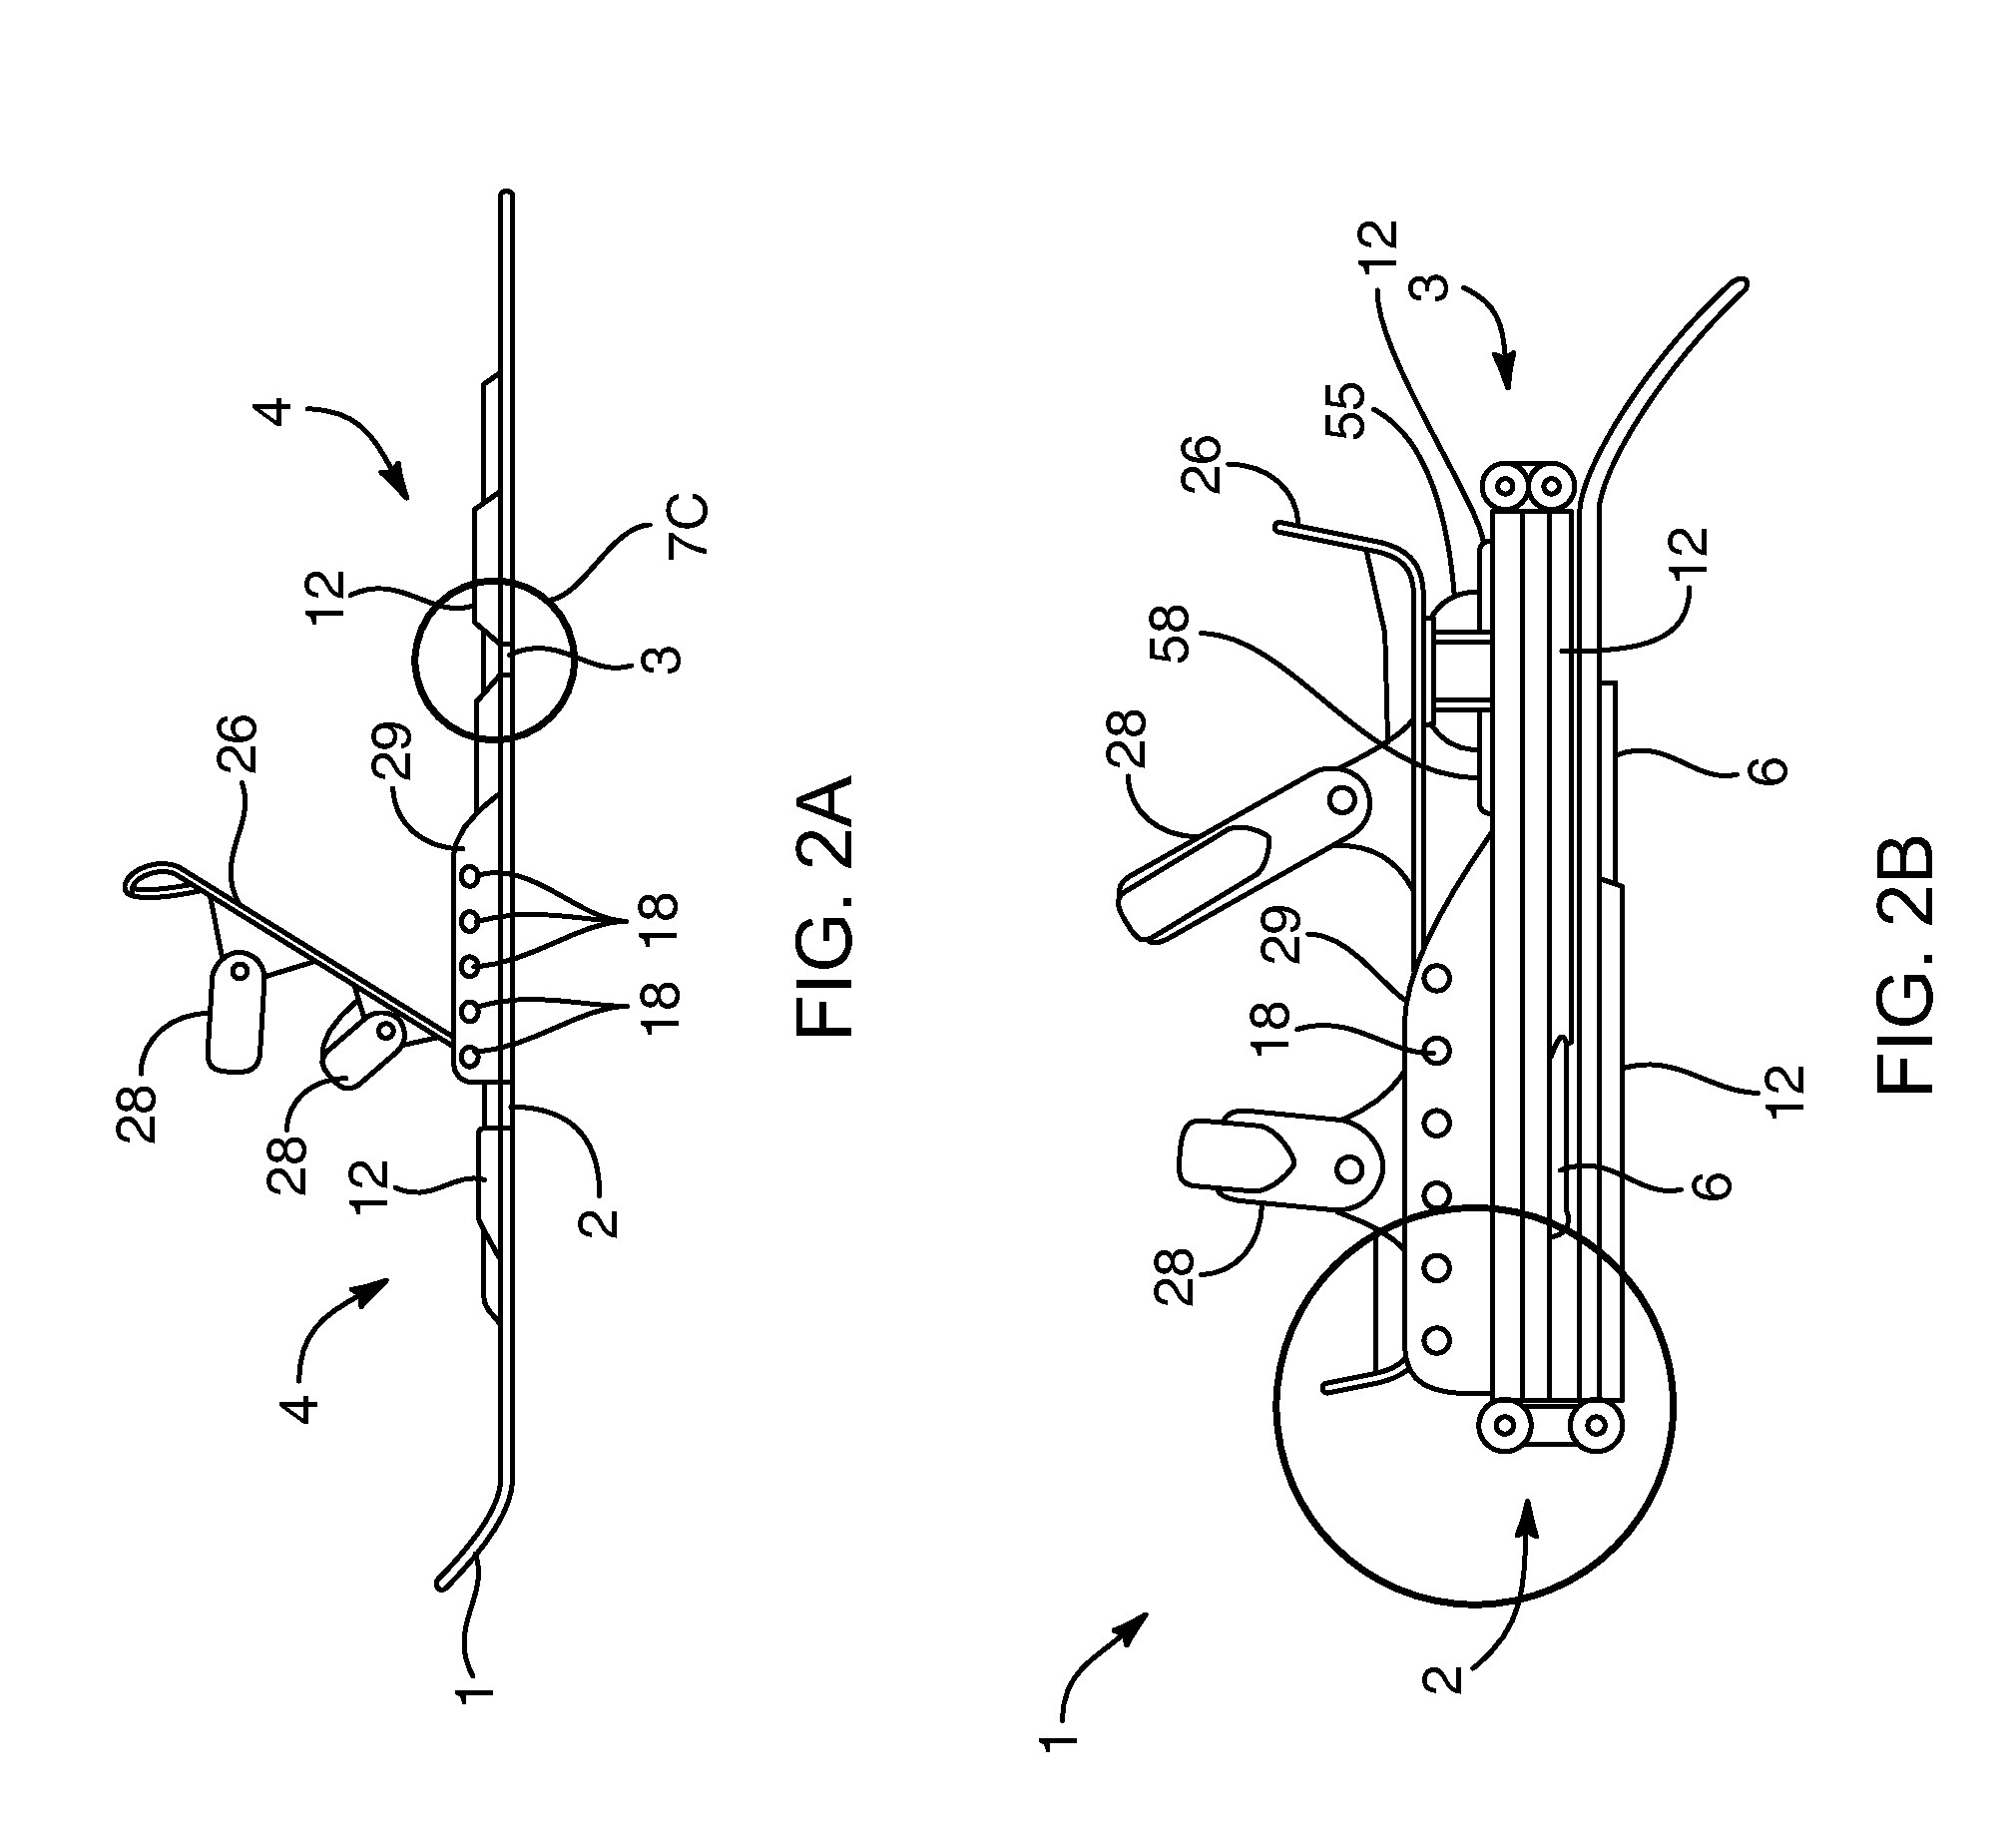 Apparatus, System, and Method for Folding, Stowing, and Deploying Skis